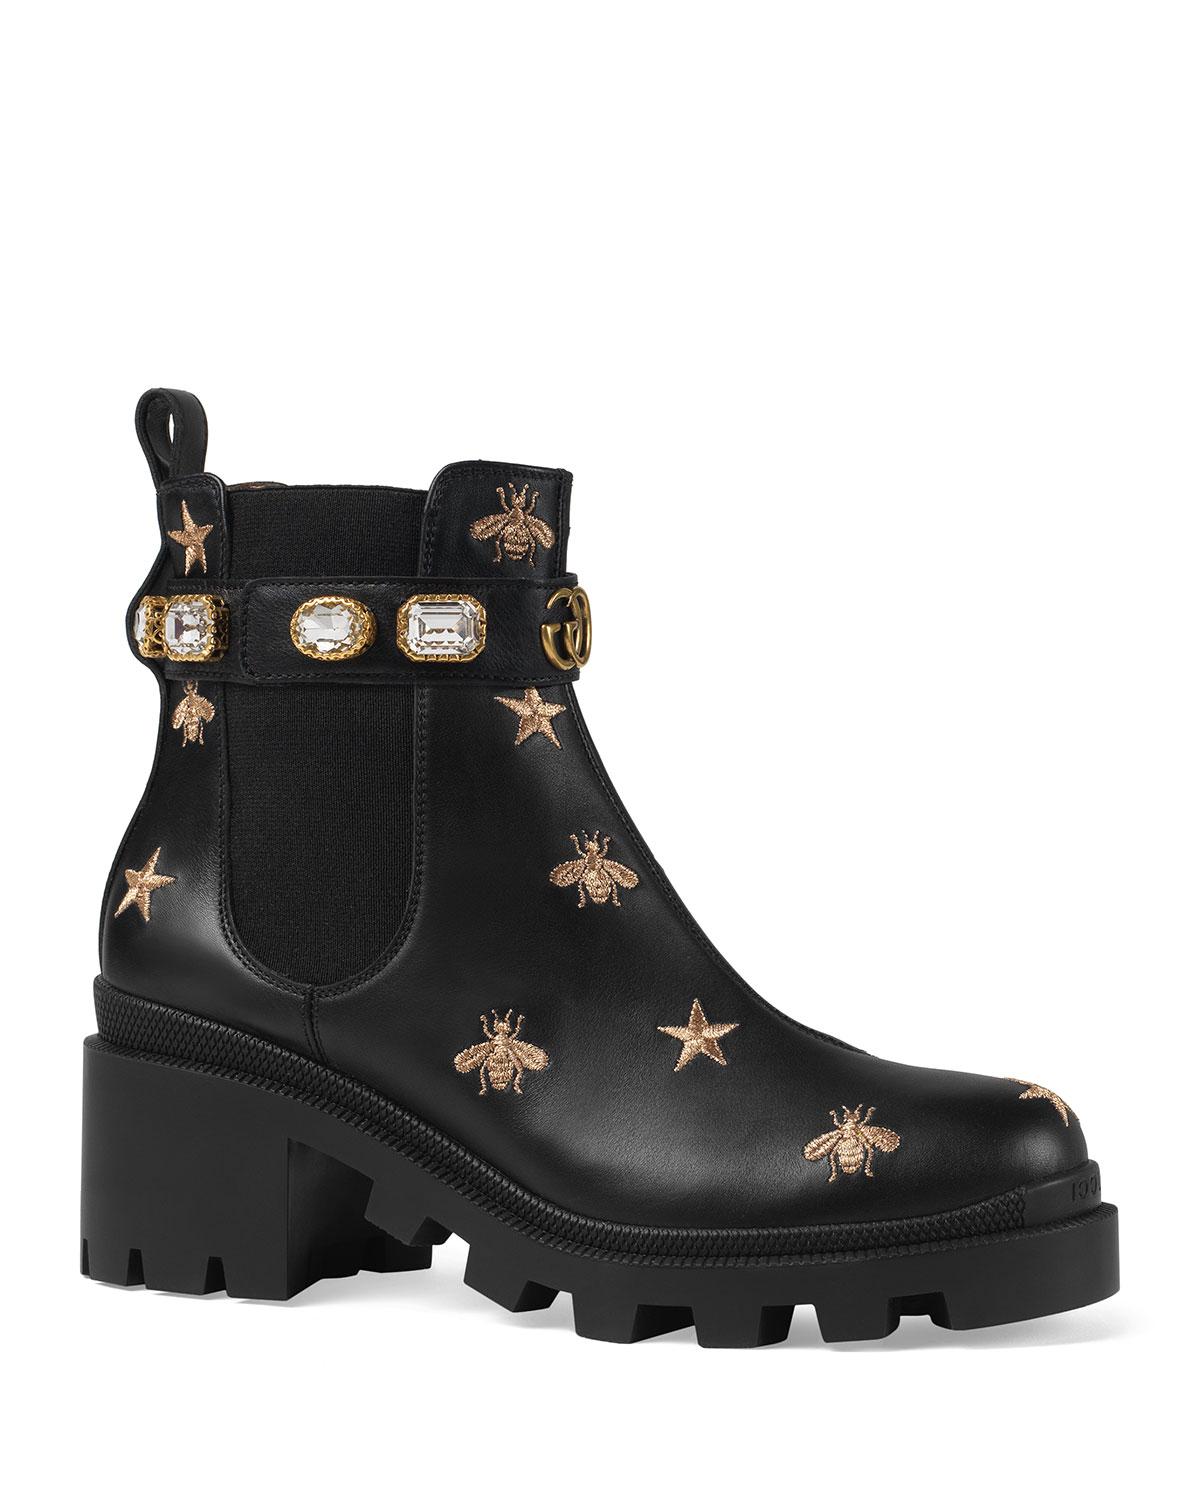 Gucci Leather Star And Bee Embroidered Boots in Black - Lyst